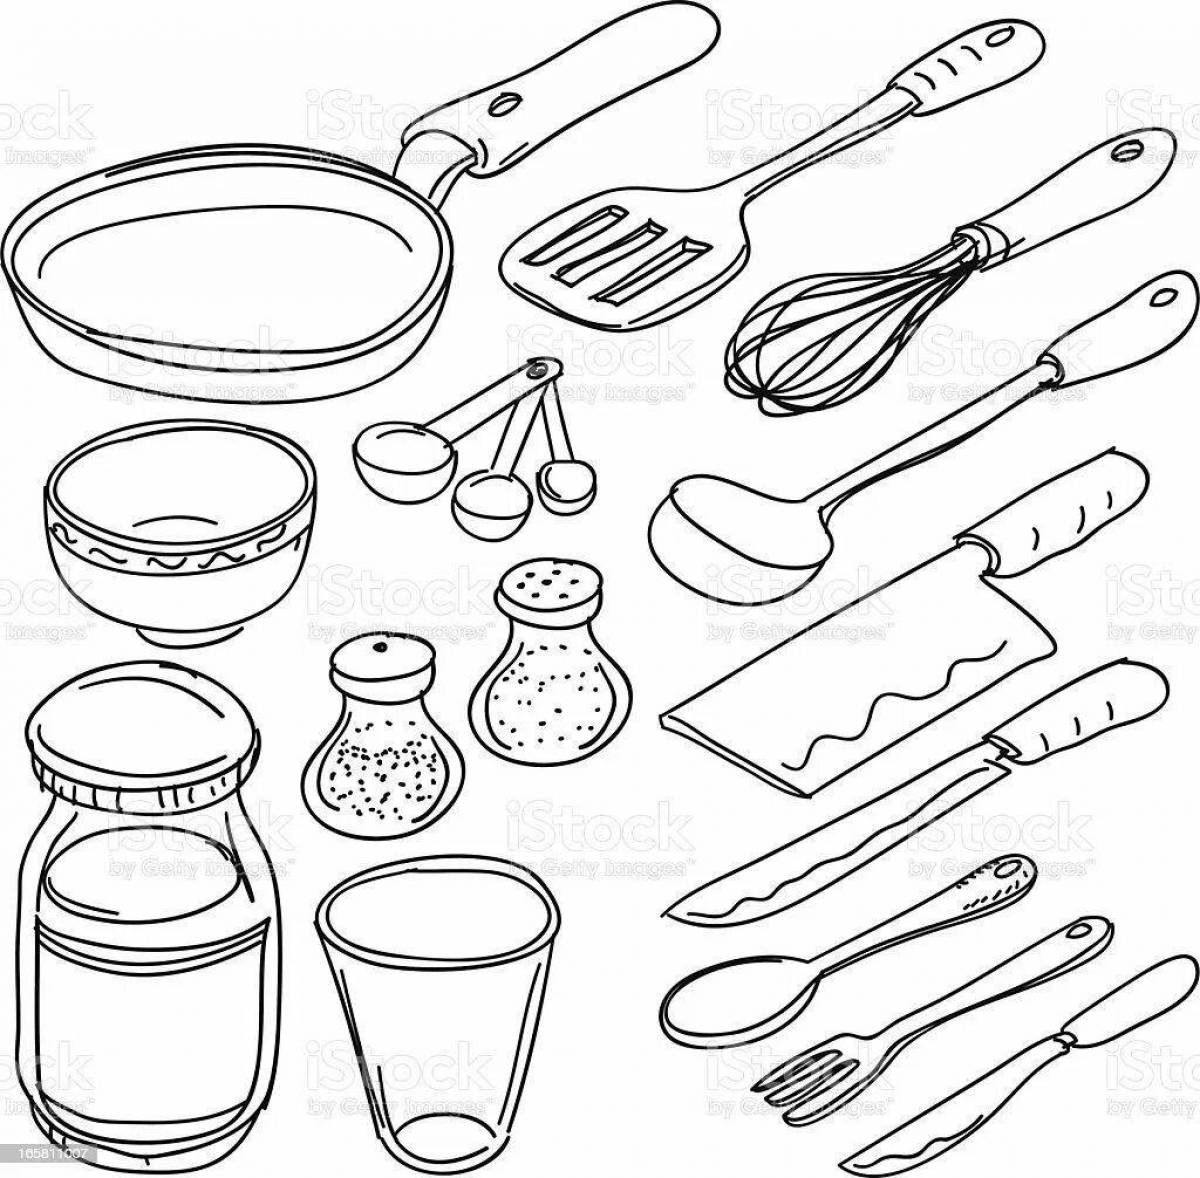 Outstanding kitchen utensils coloring page for kids